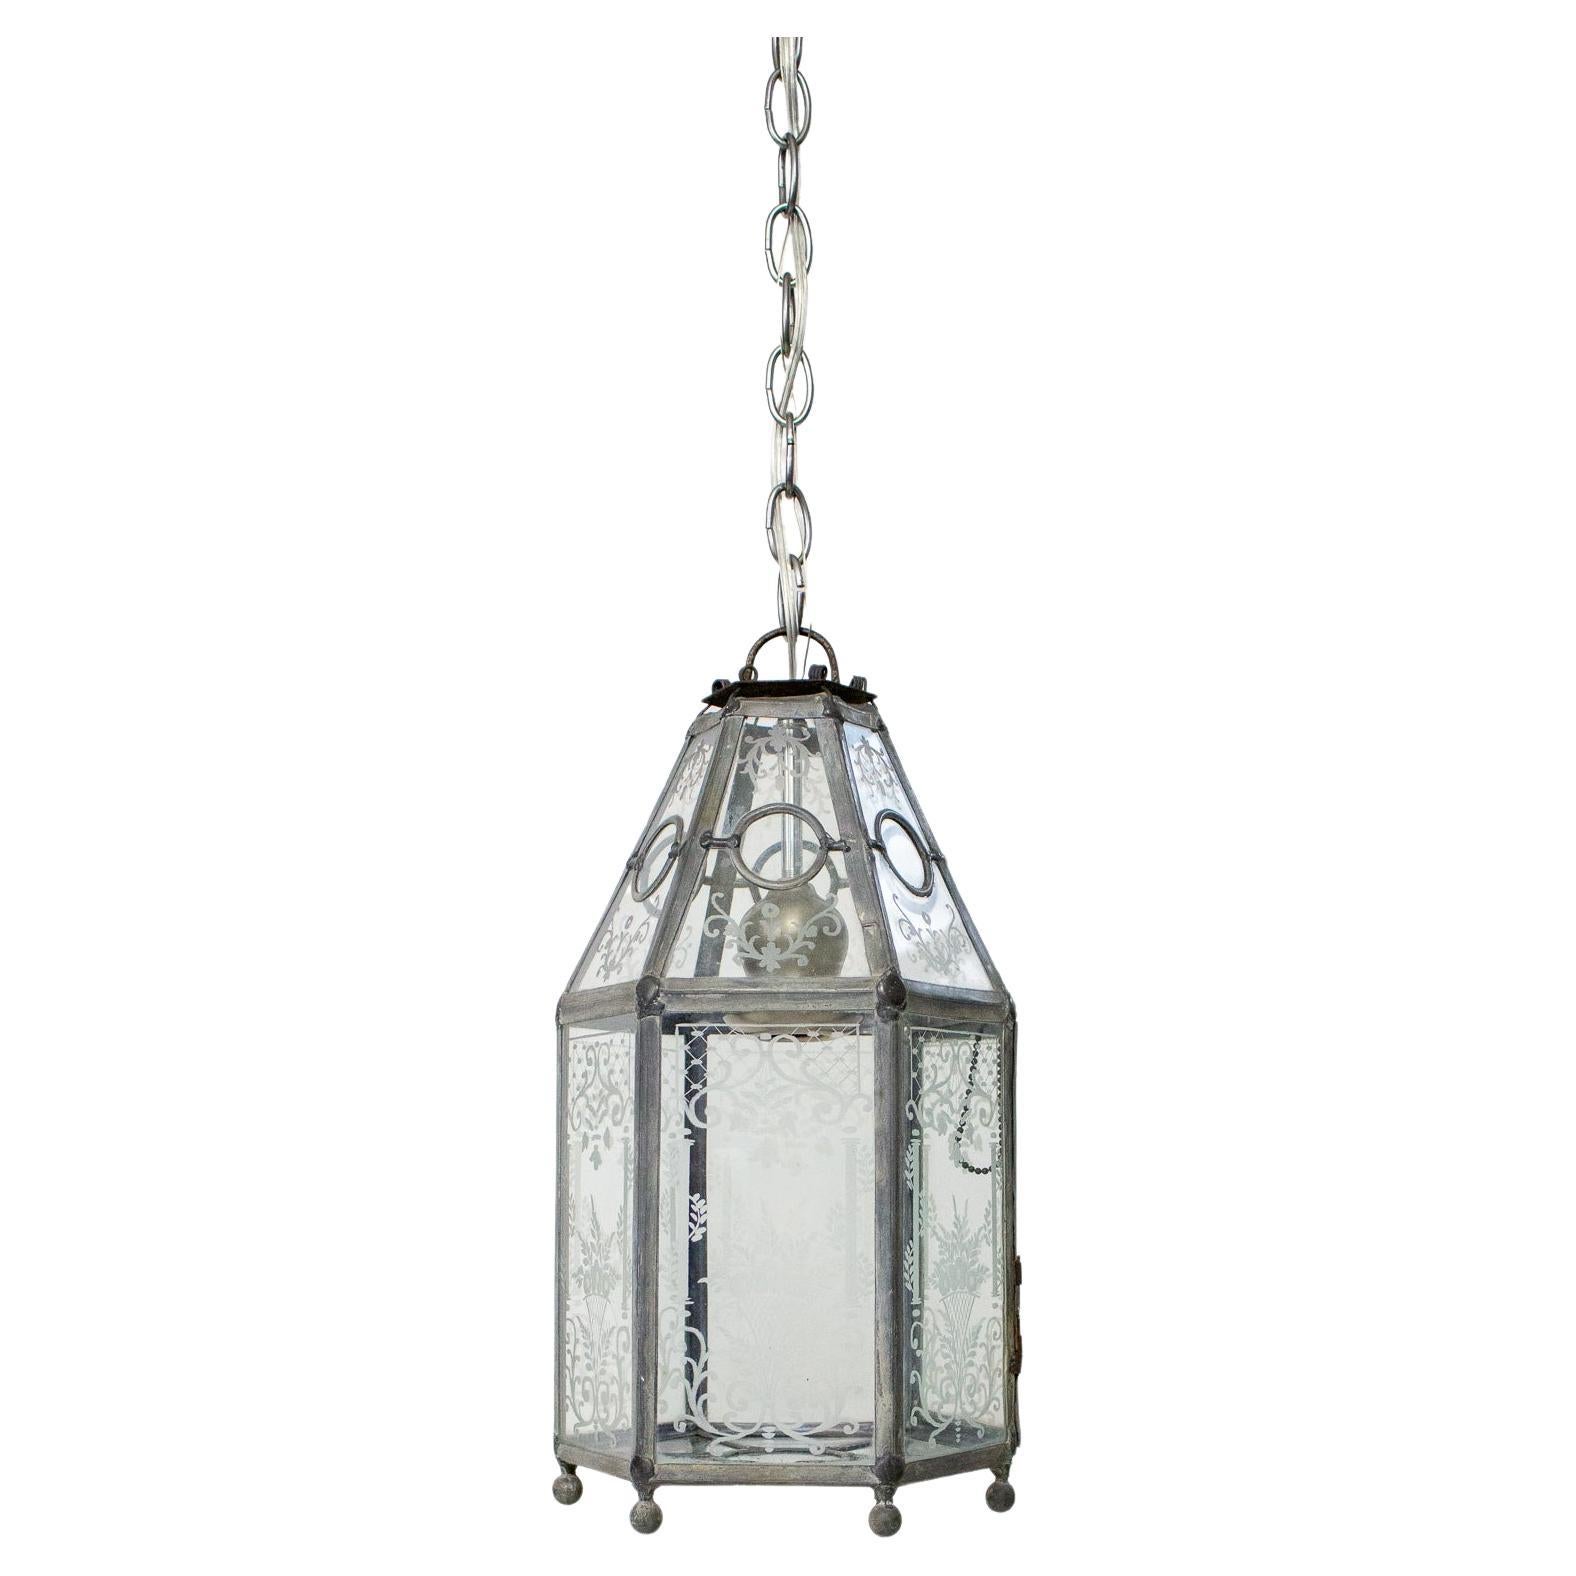 Early 20th Century E.F. Caldwell Leaded Glass Lantern For Sale